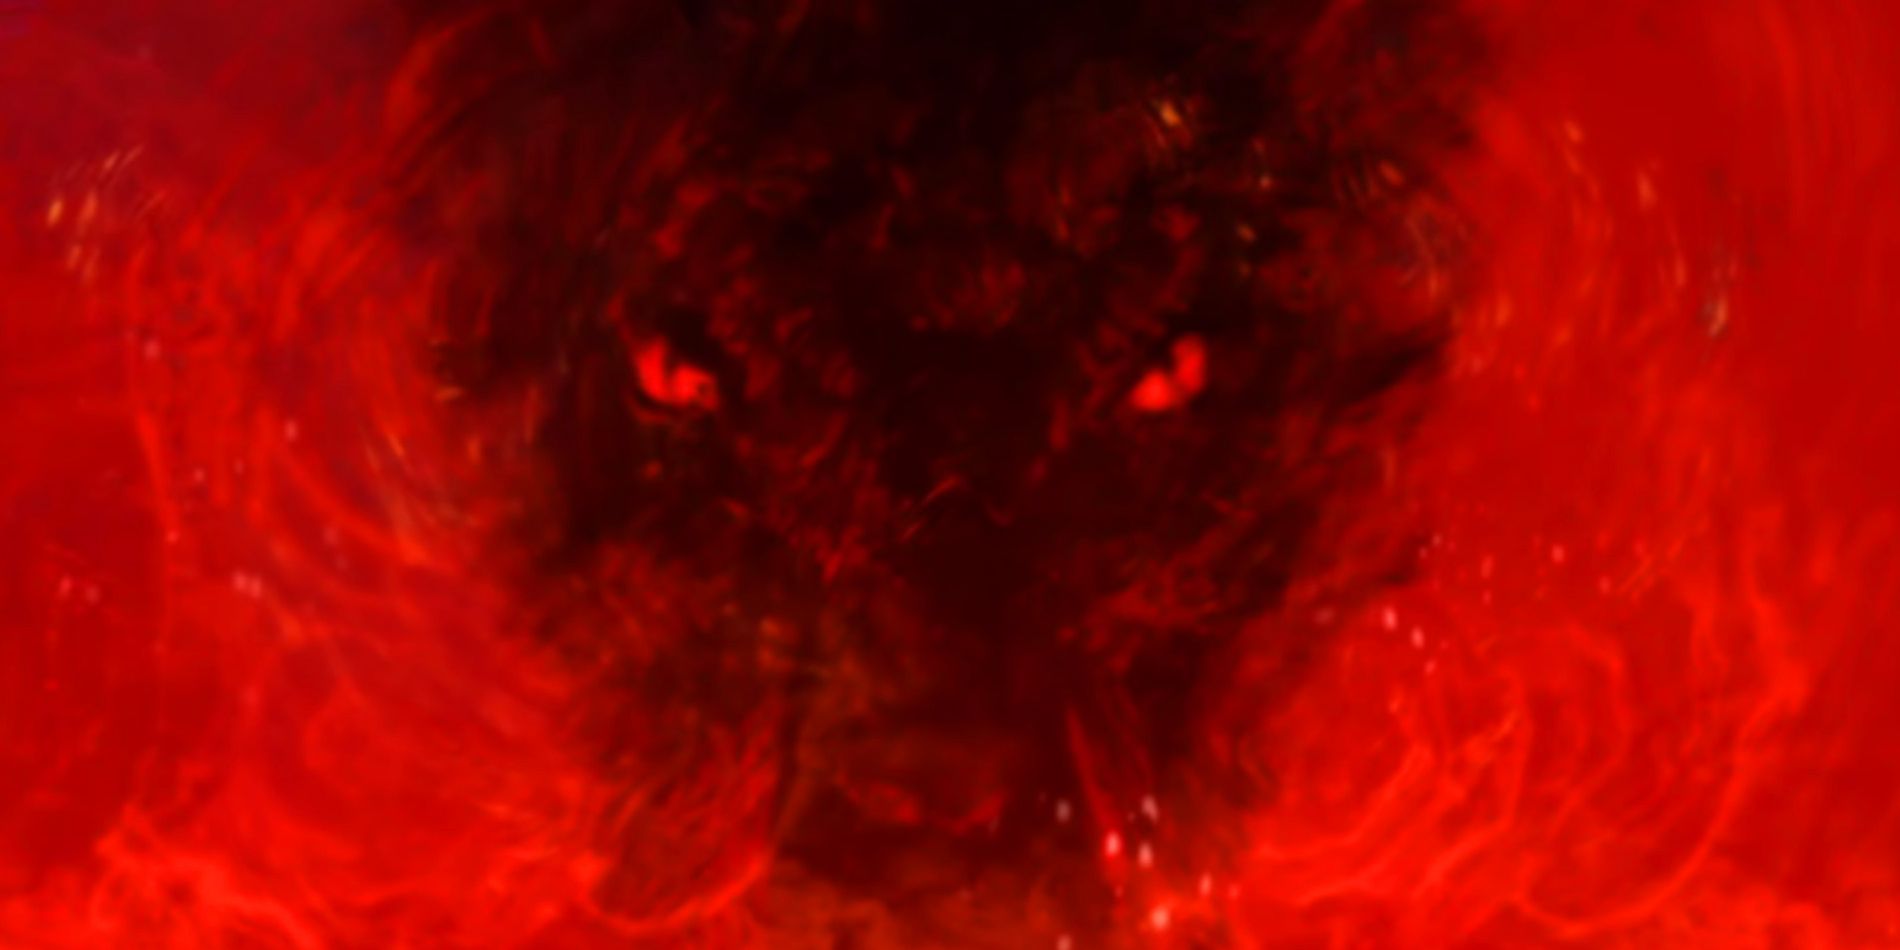 Screenshot from Monsters anime shows large dragon face obscured by red flames and mist but it's bright red eyes shine through.